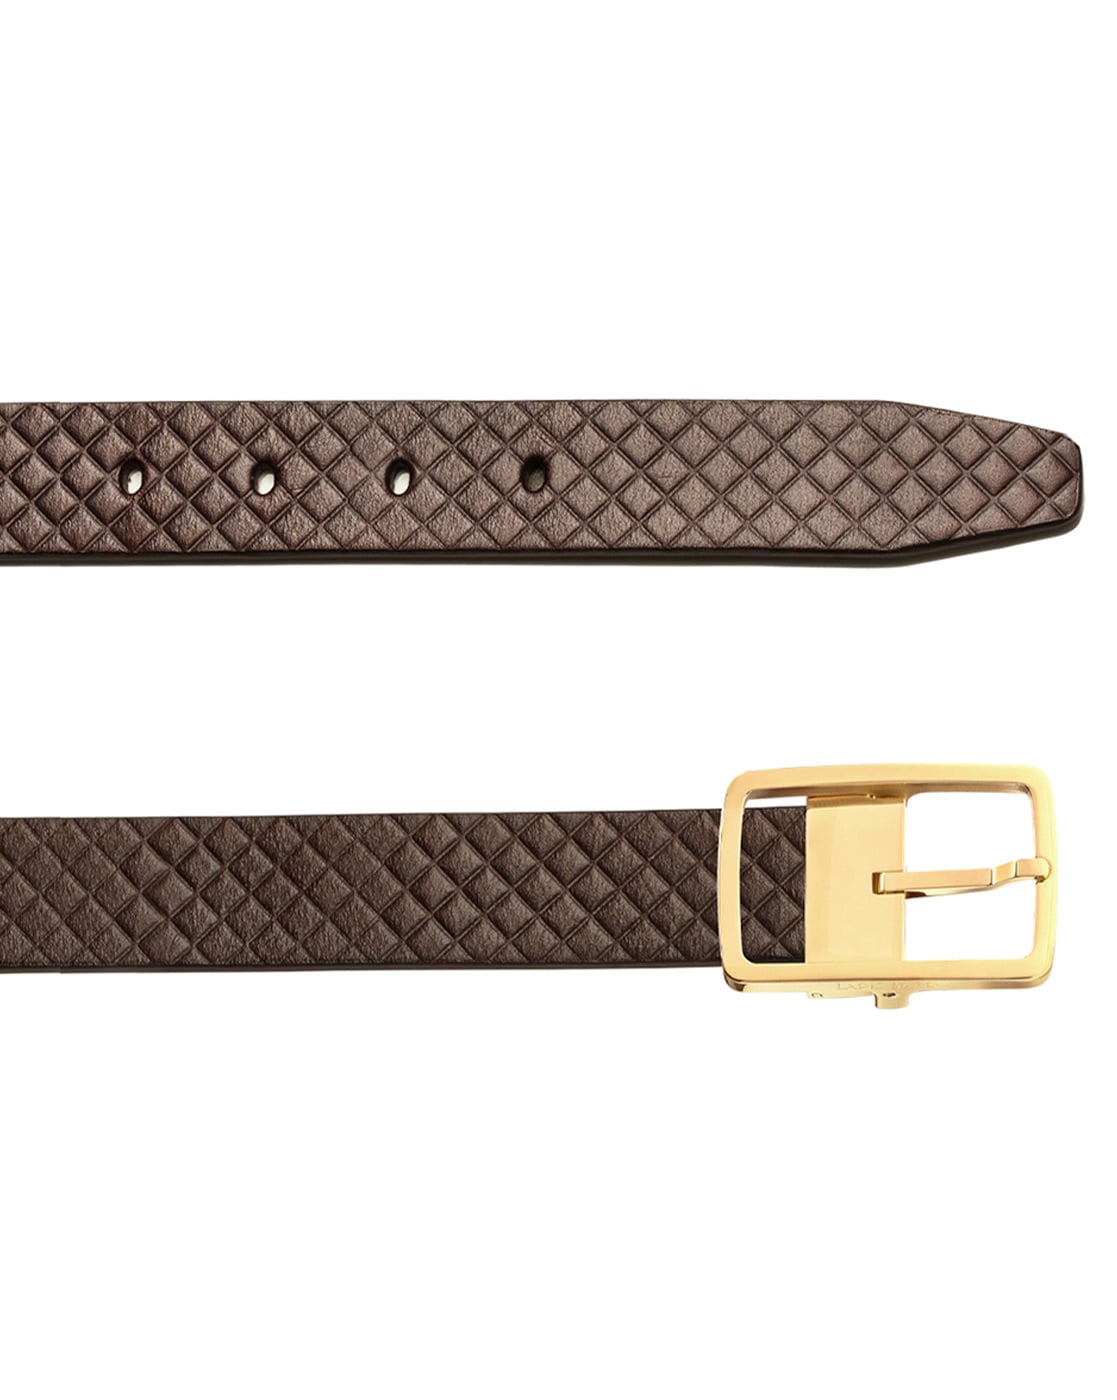 Buy WOAP Gold Colour Pu With Gold Polish Buckle Belt at